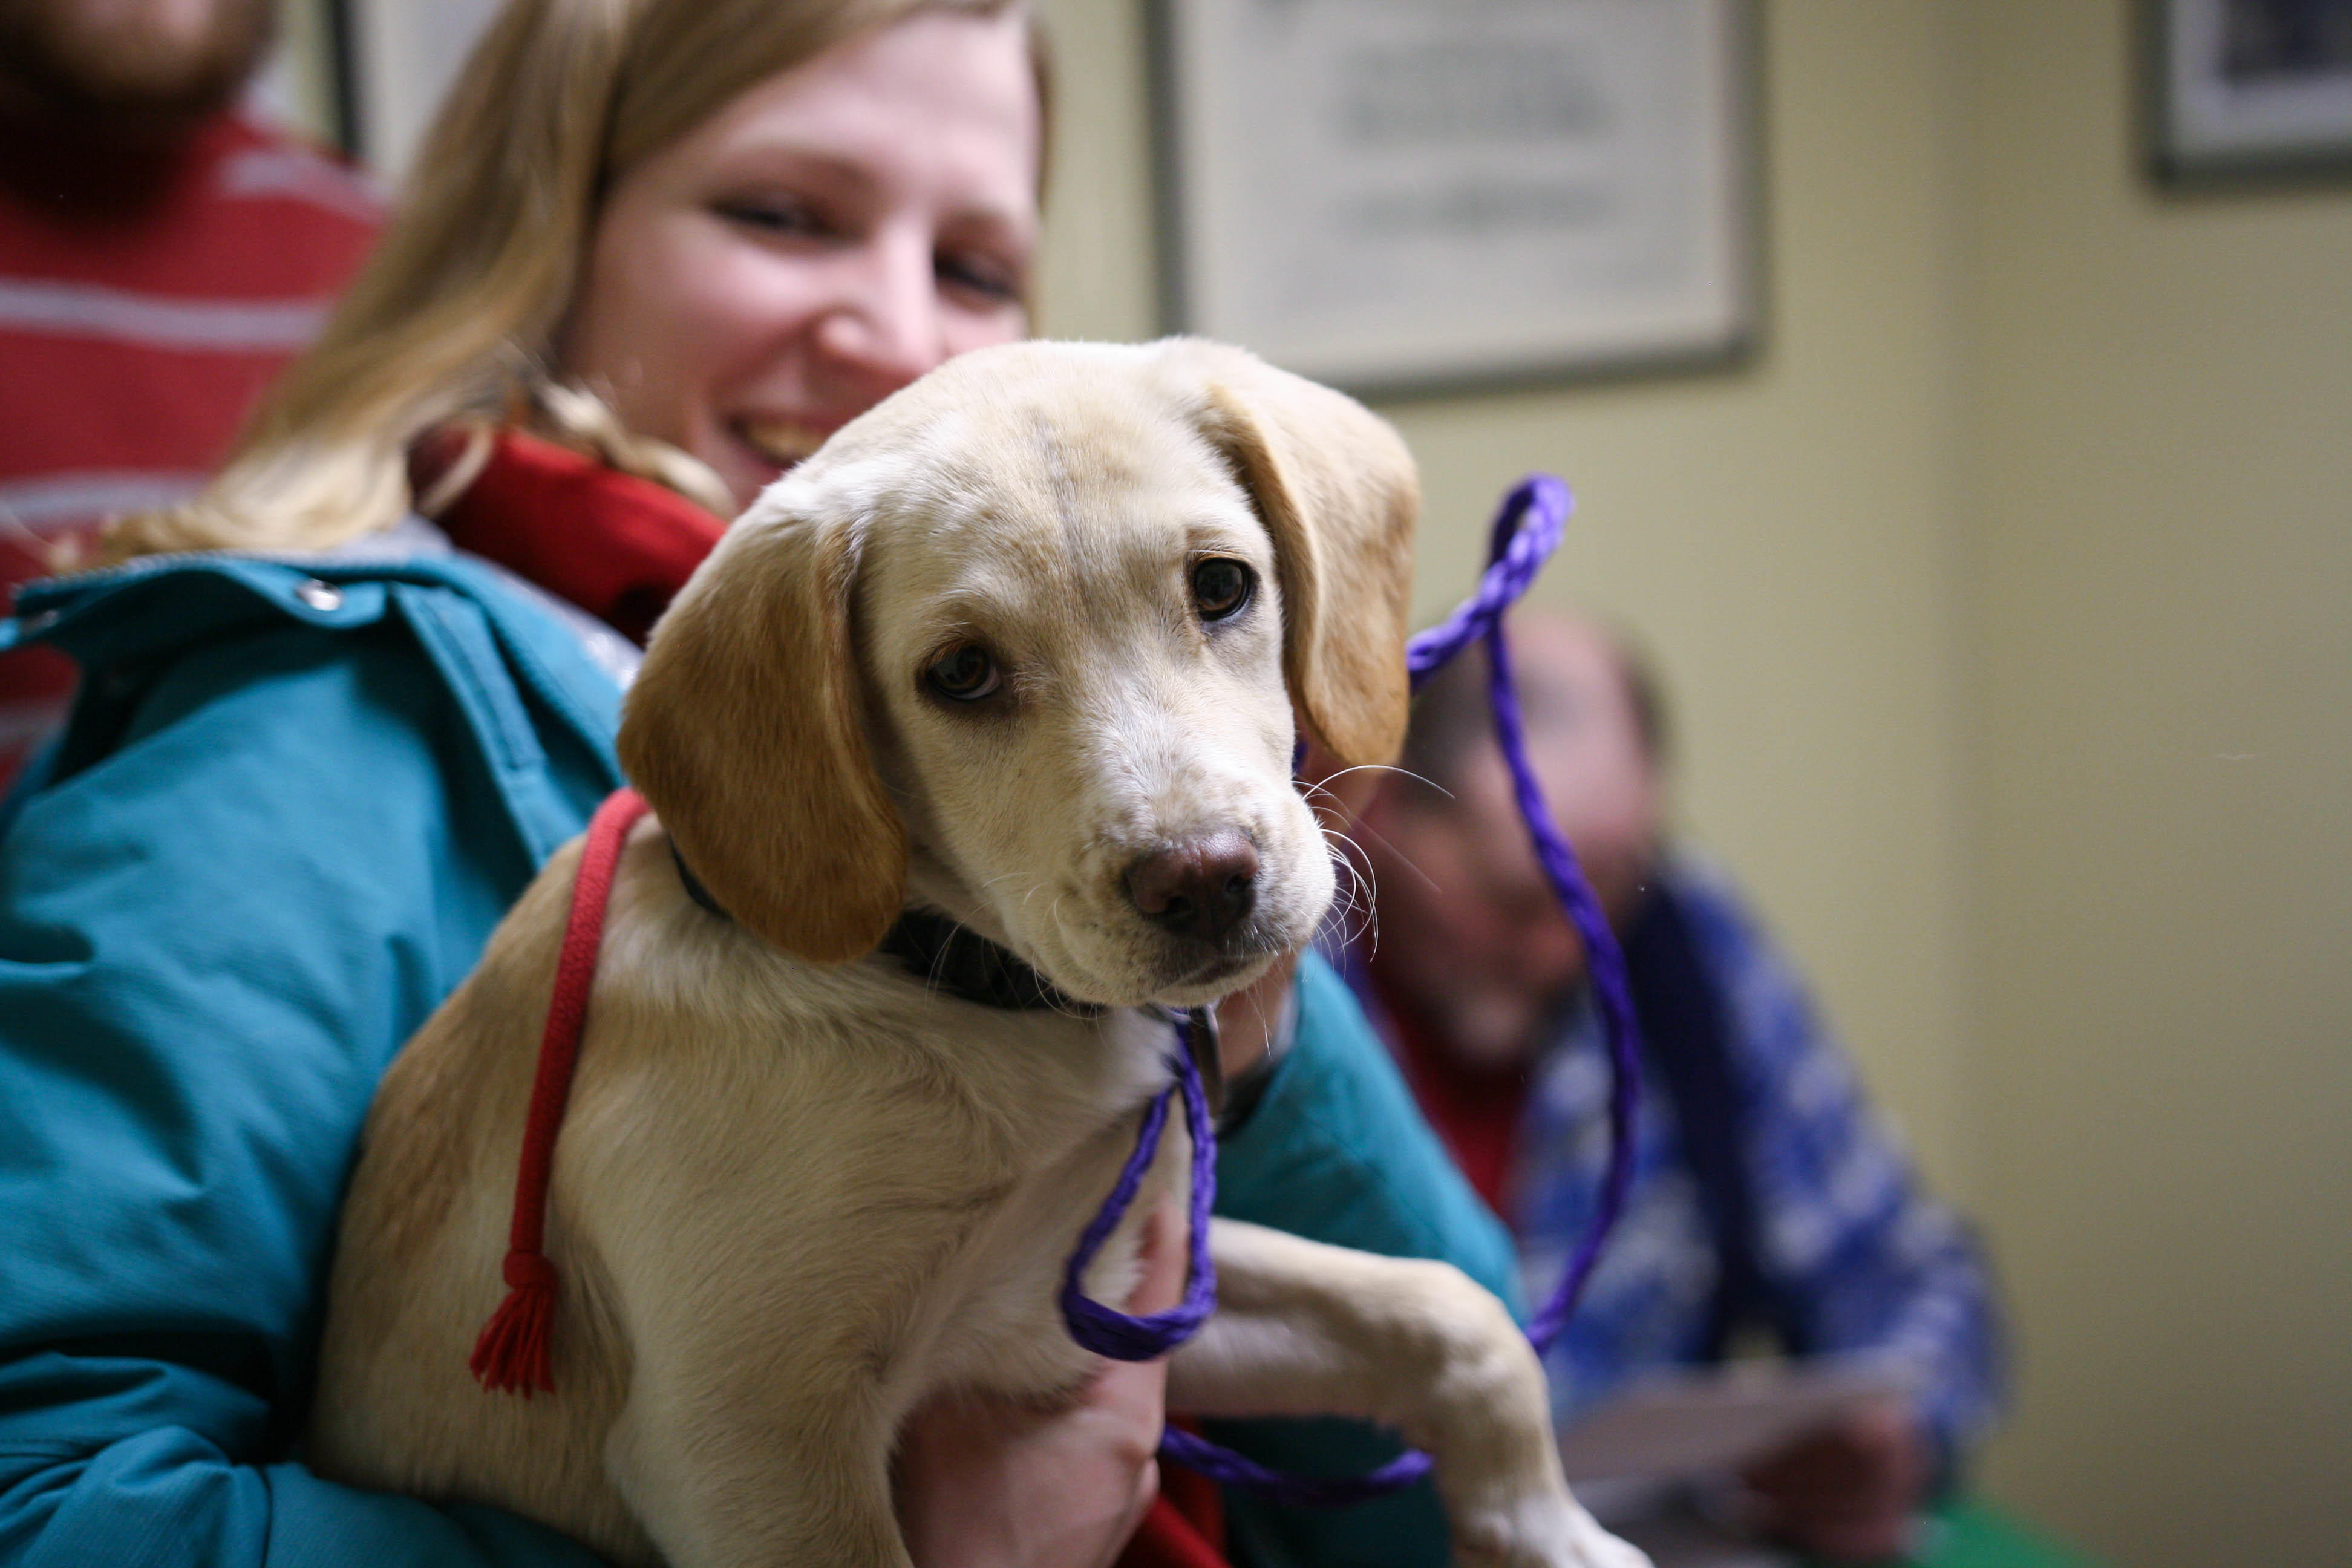 The clinical team at East Hampton Veterinary Group is trained to care for your pet during each stage of life.